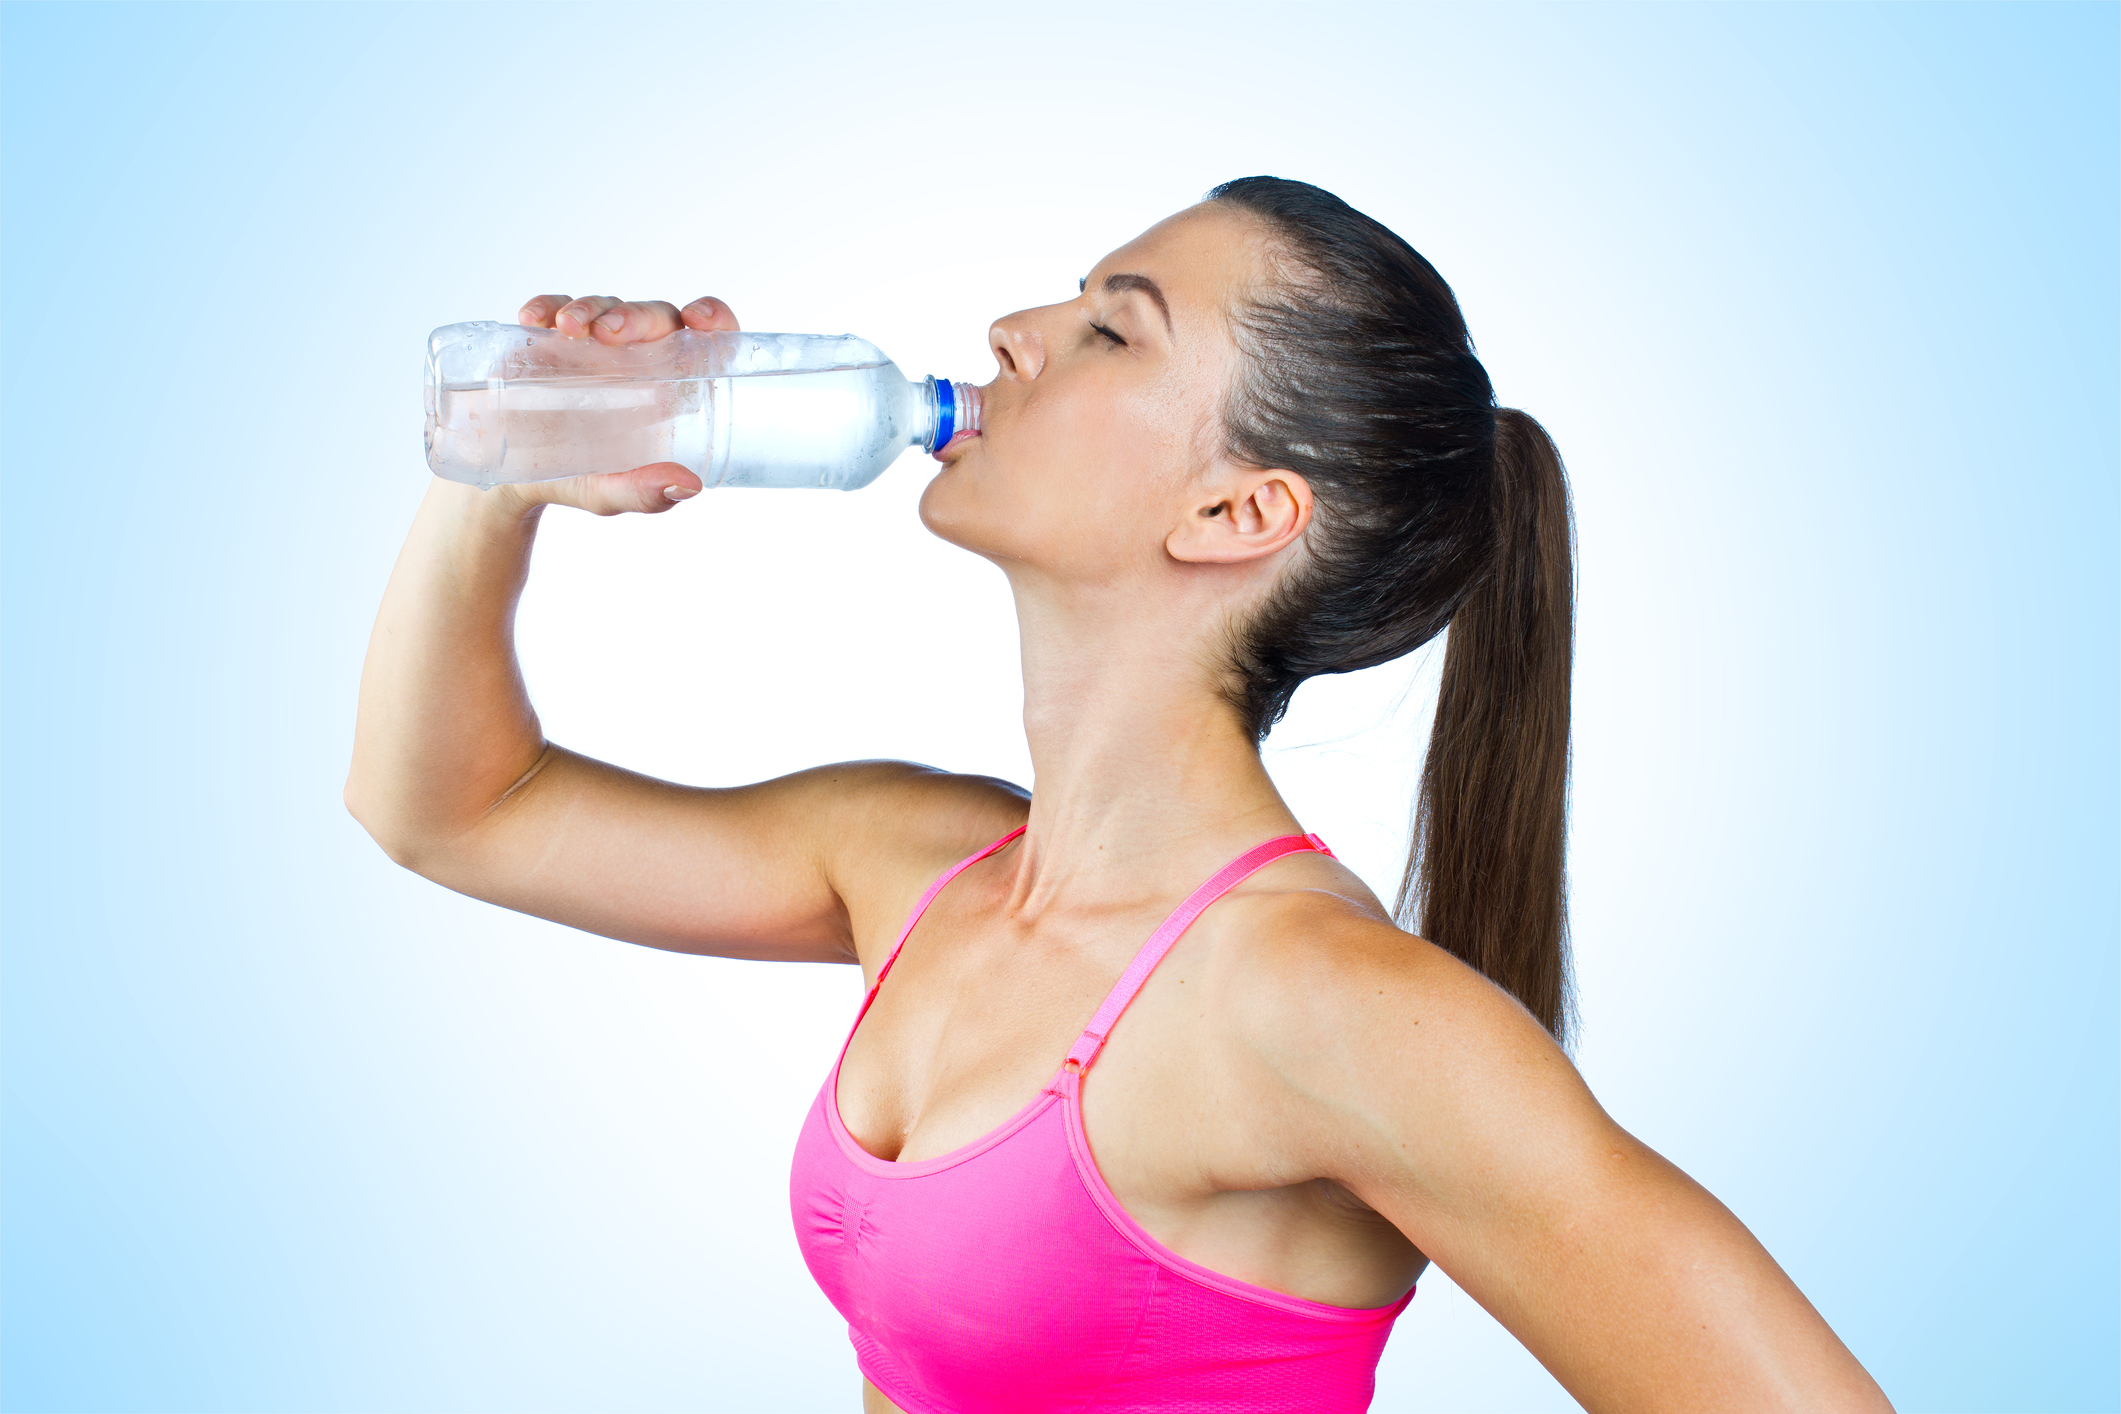 Our daily water intake bottle can aid your health!